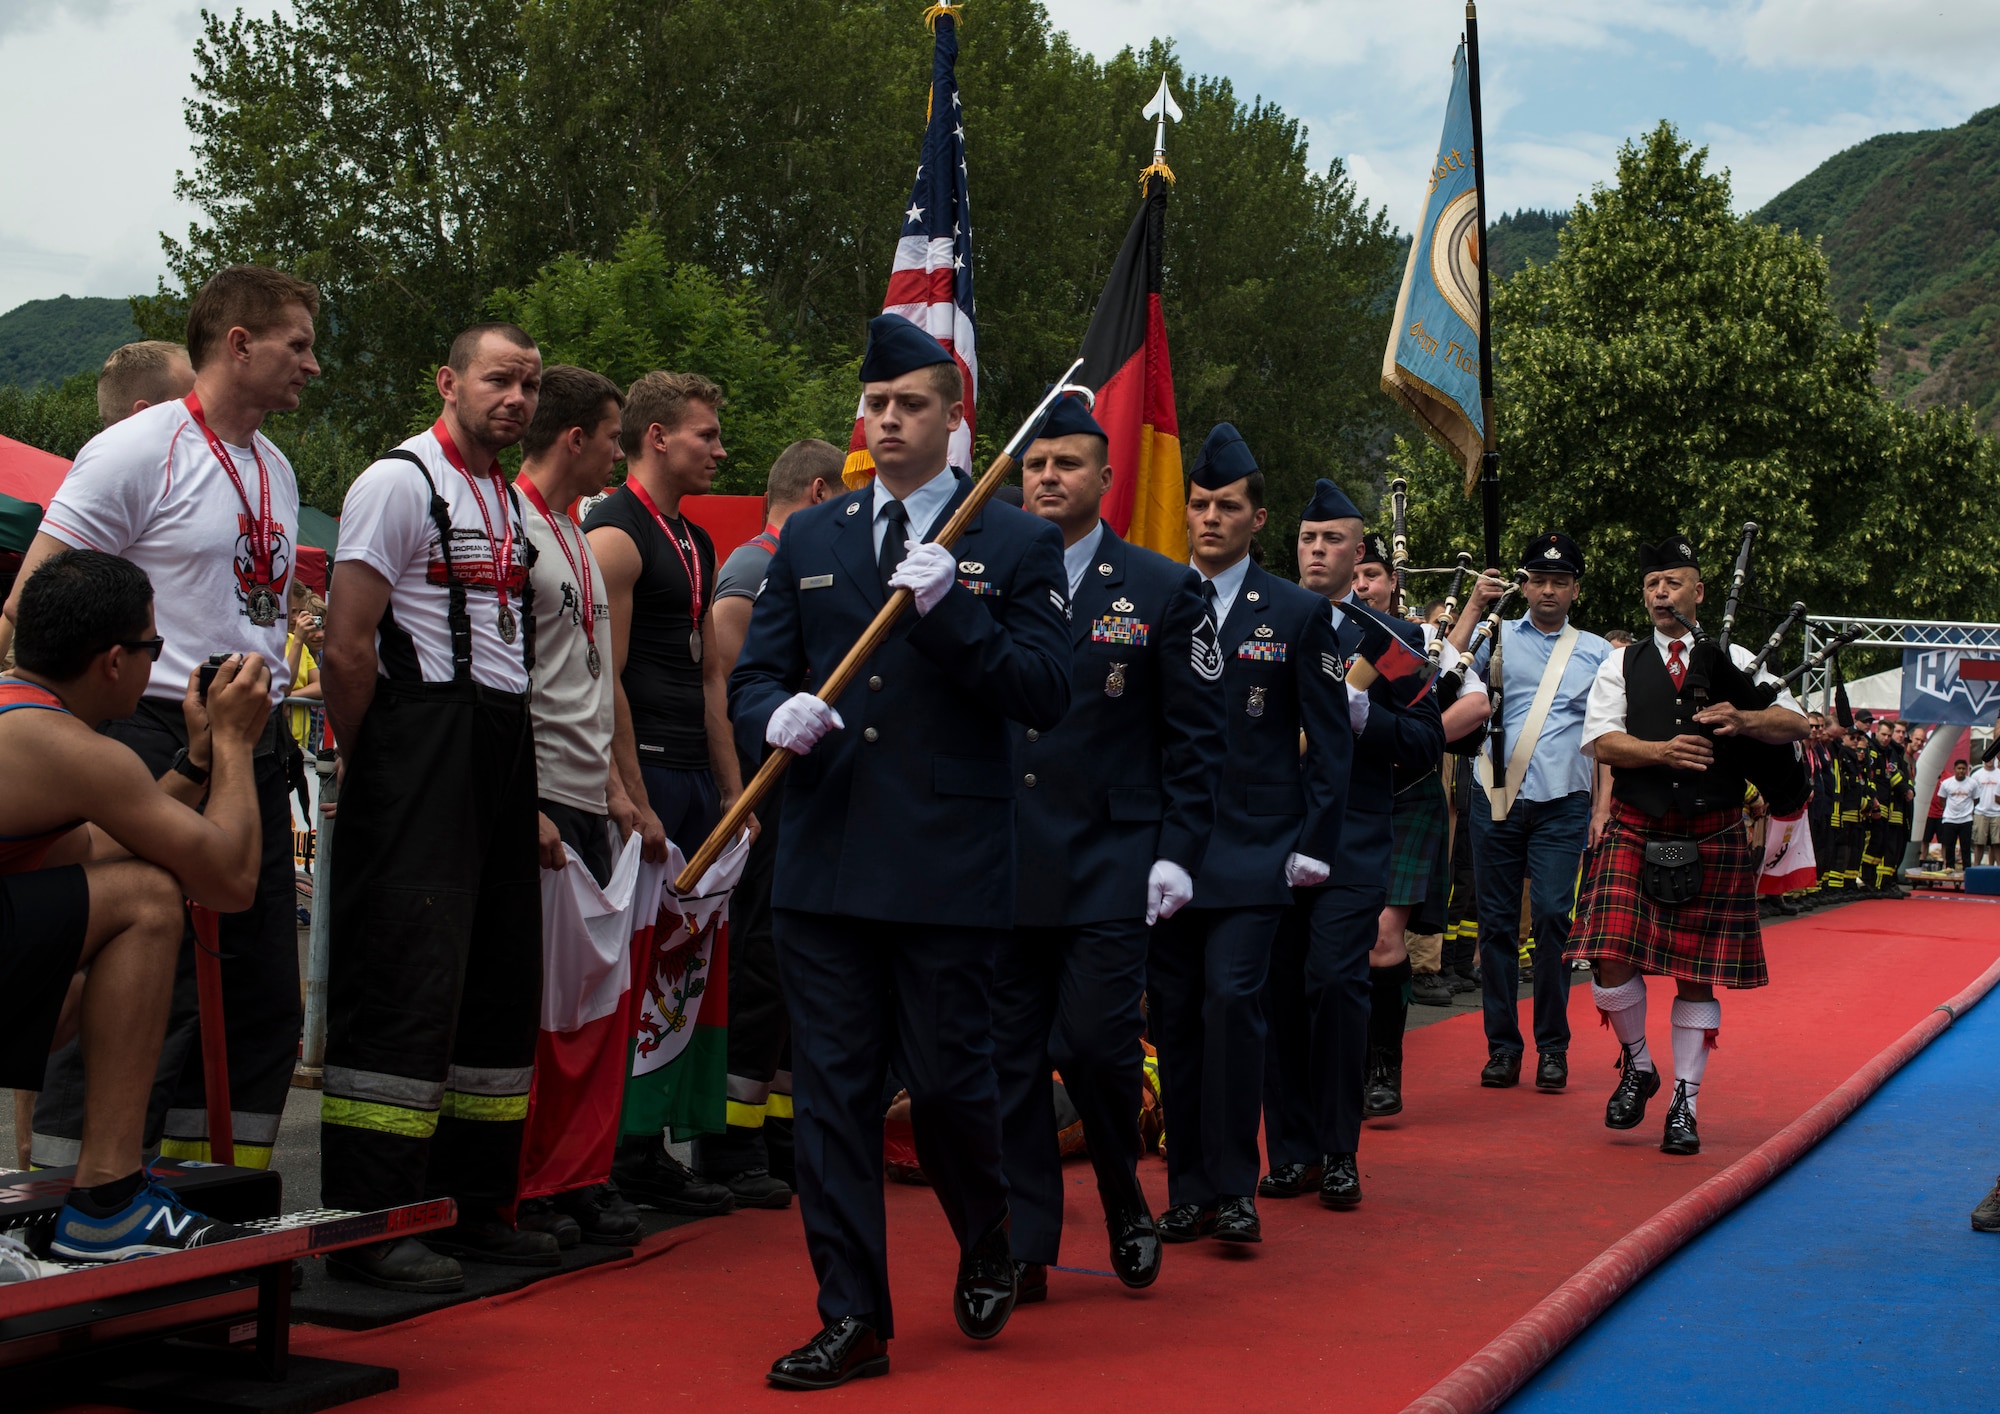 Spangdahlem Air Base honor guard members present the colors during the first Mosel Firefighter Combat Challenge opening ceremony at Ediger-Eller, Germany, July 6, 2014. More than 200 firefighters from across Europe participated in the challenge. (U.S. Air Force photo by Staff Sgt. Christopher Ruano/Released)